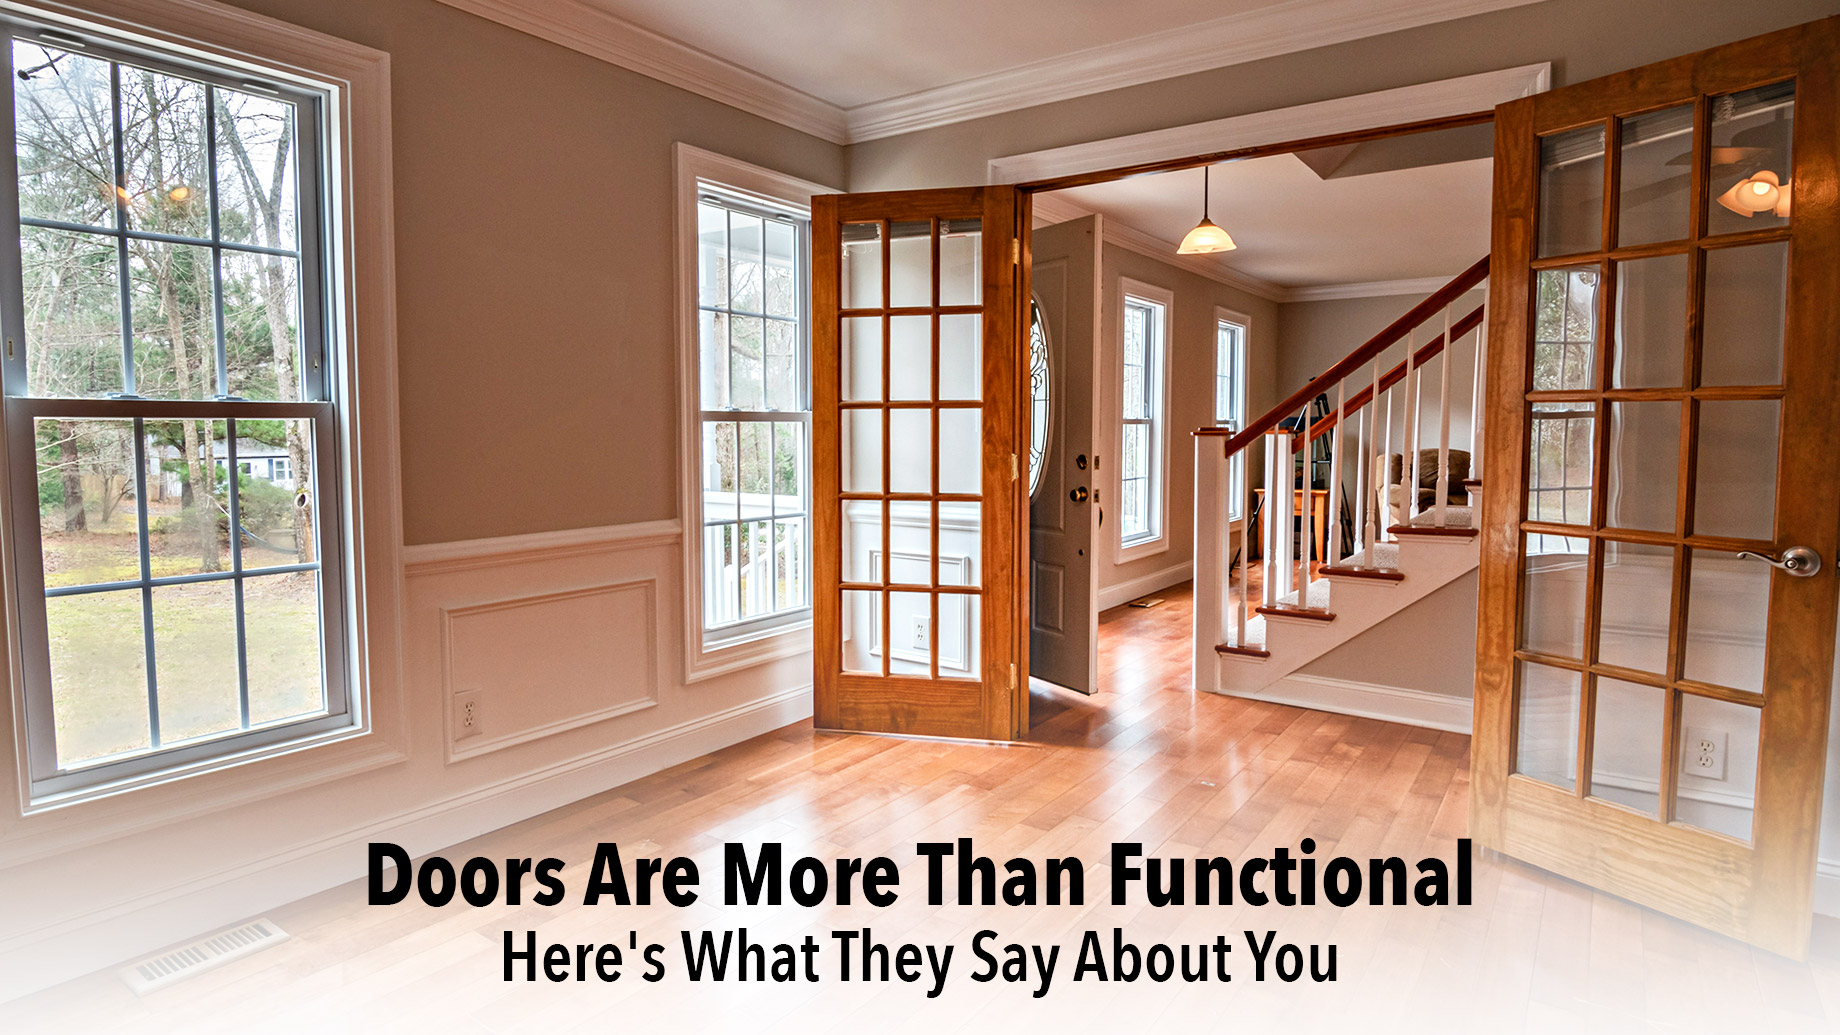 Doors Are More Than Functional - Here's What They Say About You